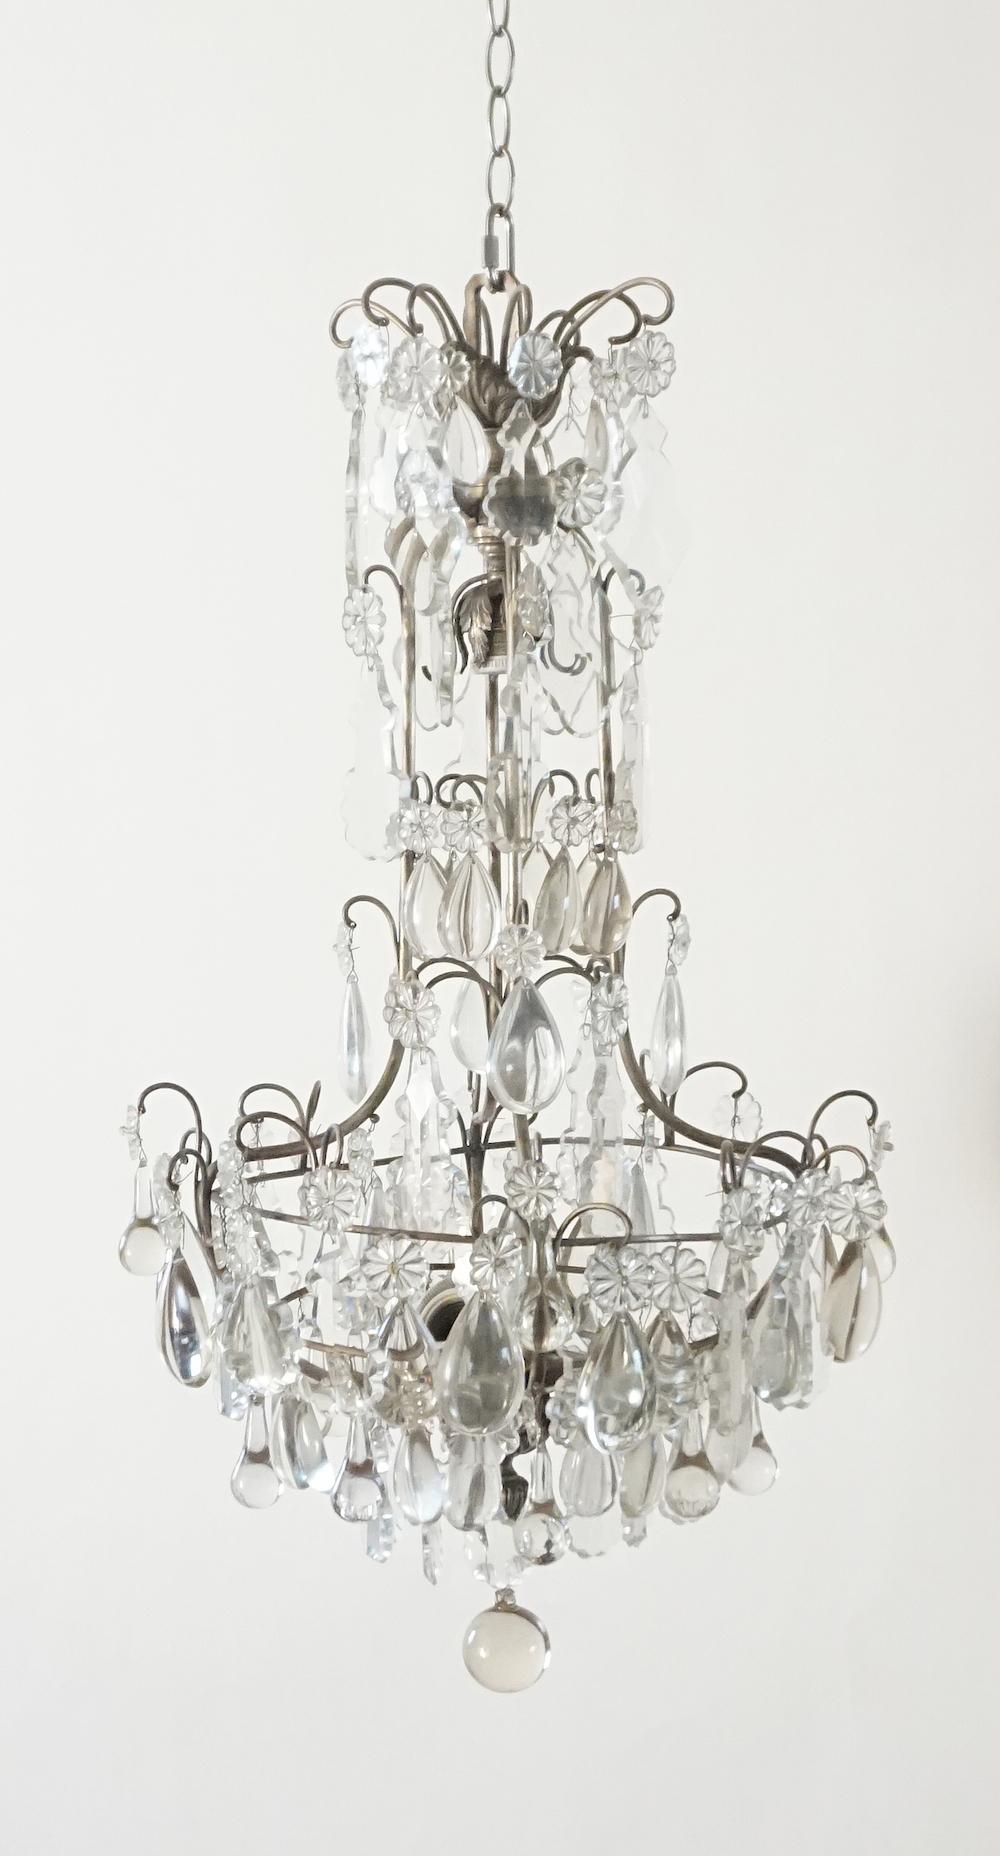 French, circa 1930 Louis XV style chandelier having silver-gilt metal frame with internal sockets hung with various shapes and sizes of faceted and smooth cut crystal prisms.

Additional search terms:  Bagues, Jansen